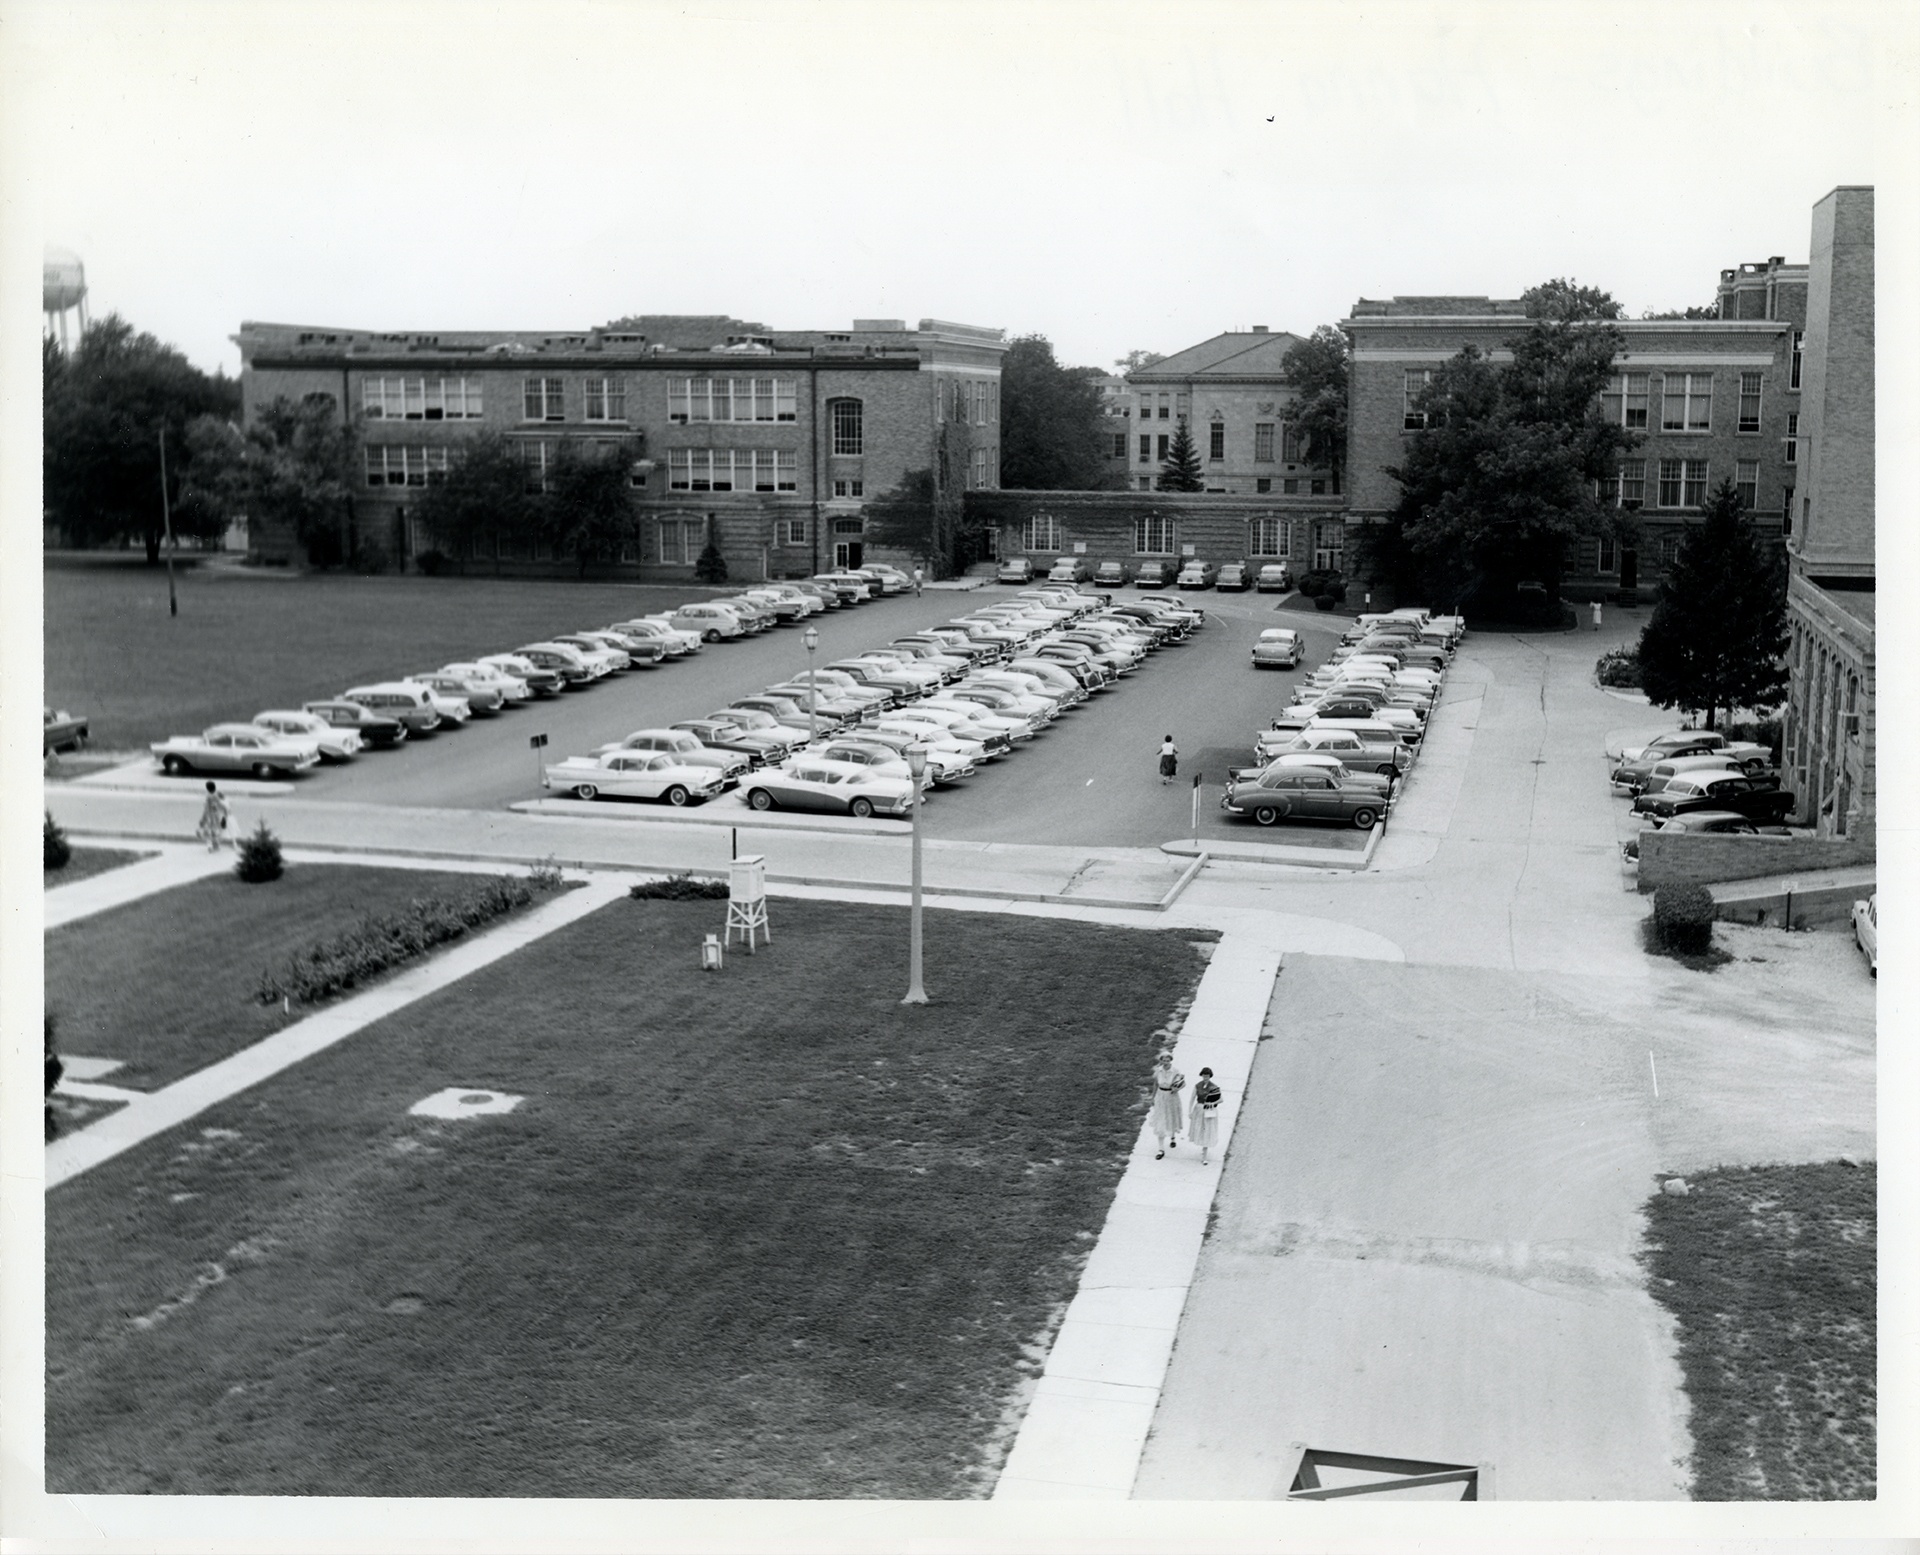 Parking lot view of Hanna Hall